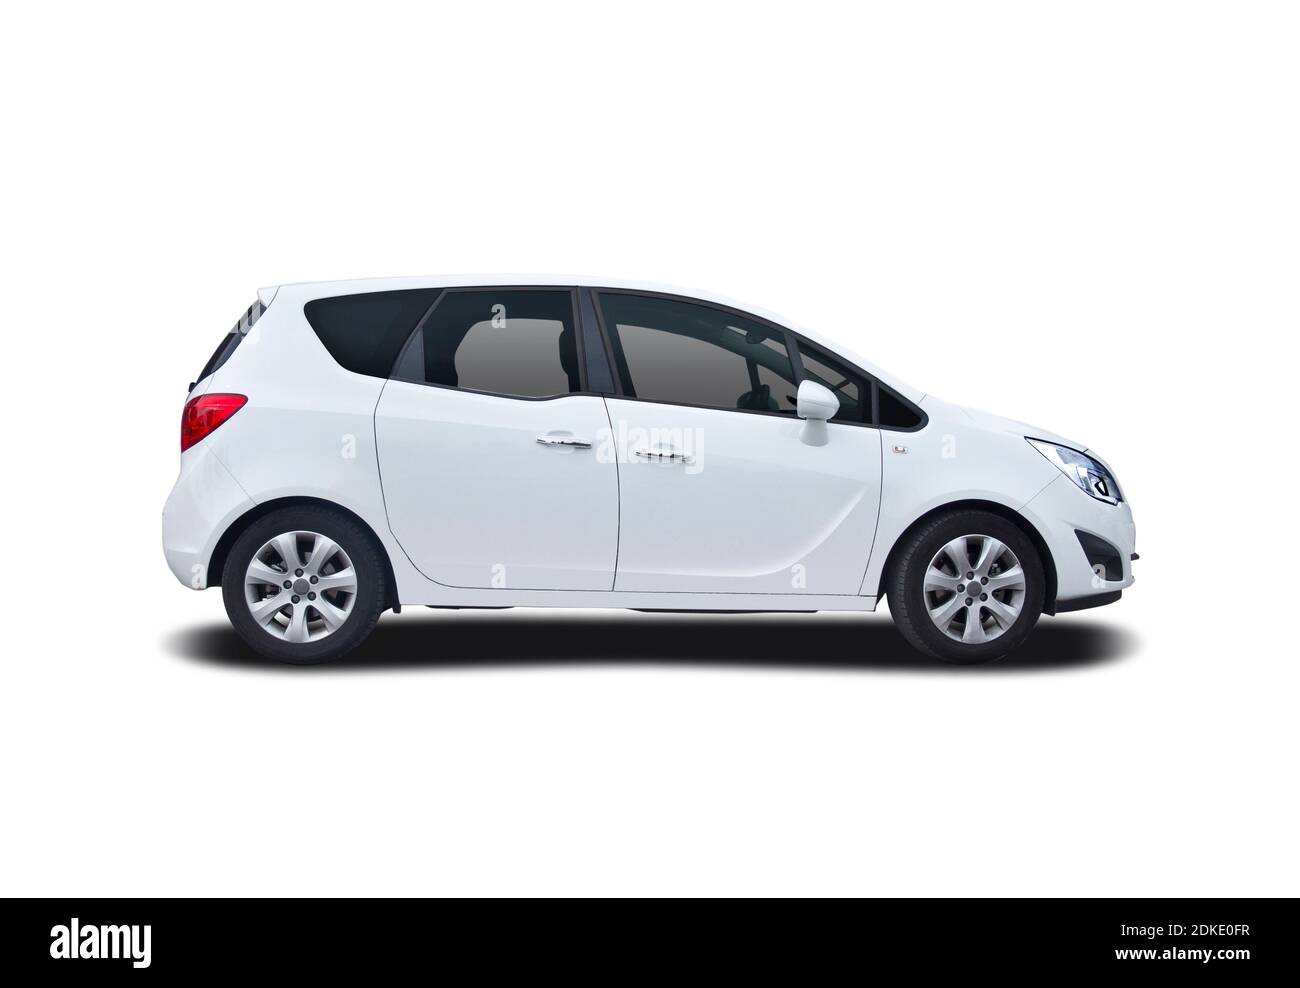 White German MPV car side view isolated on white background Stock Photo